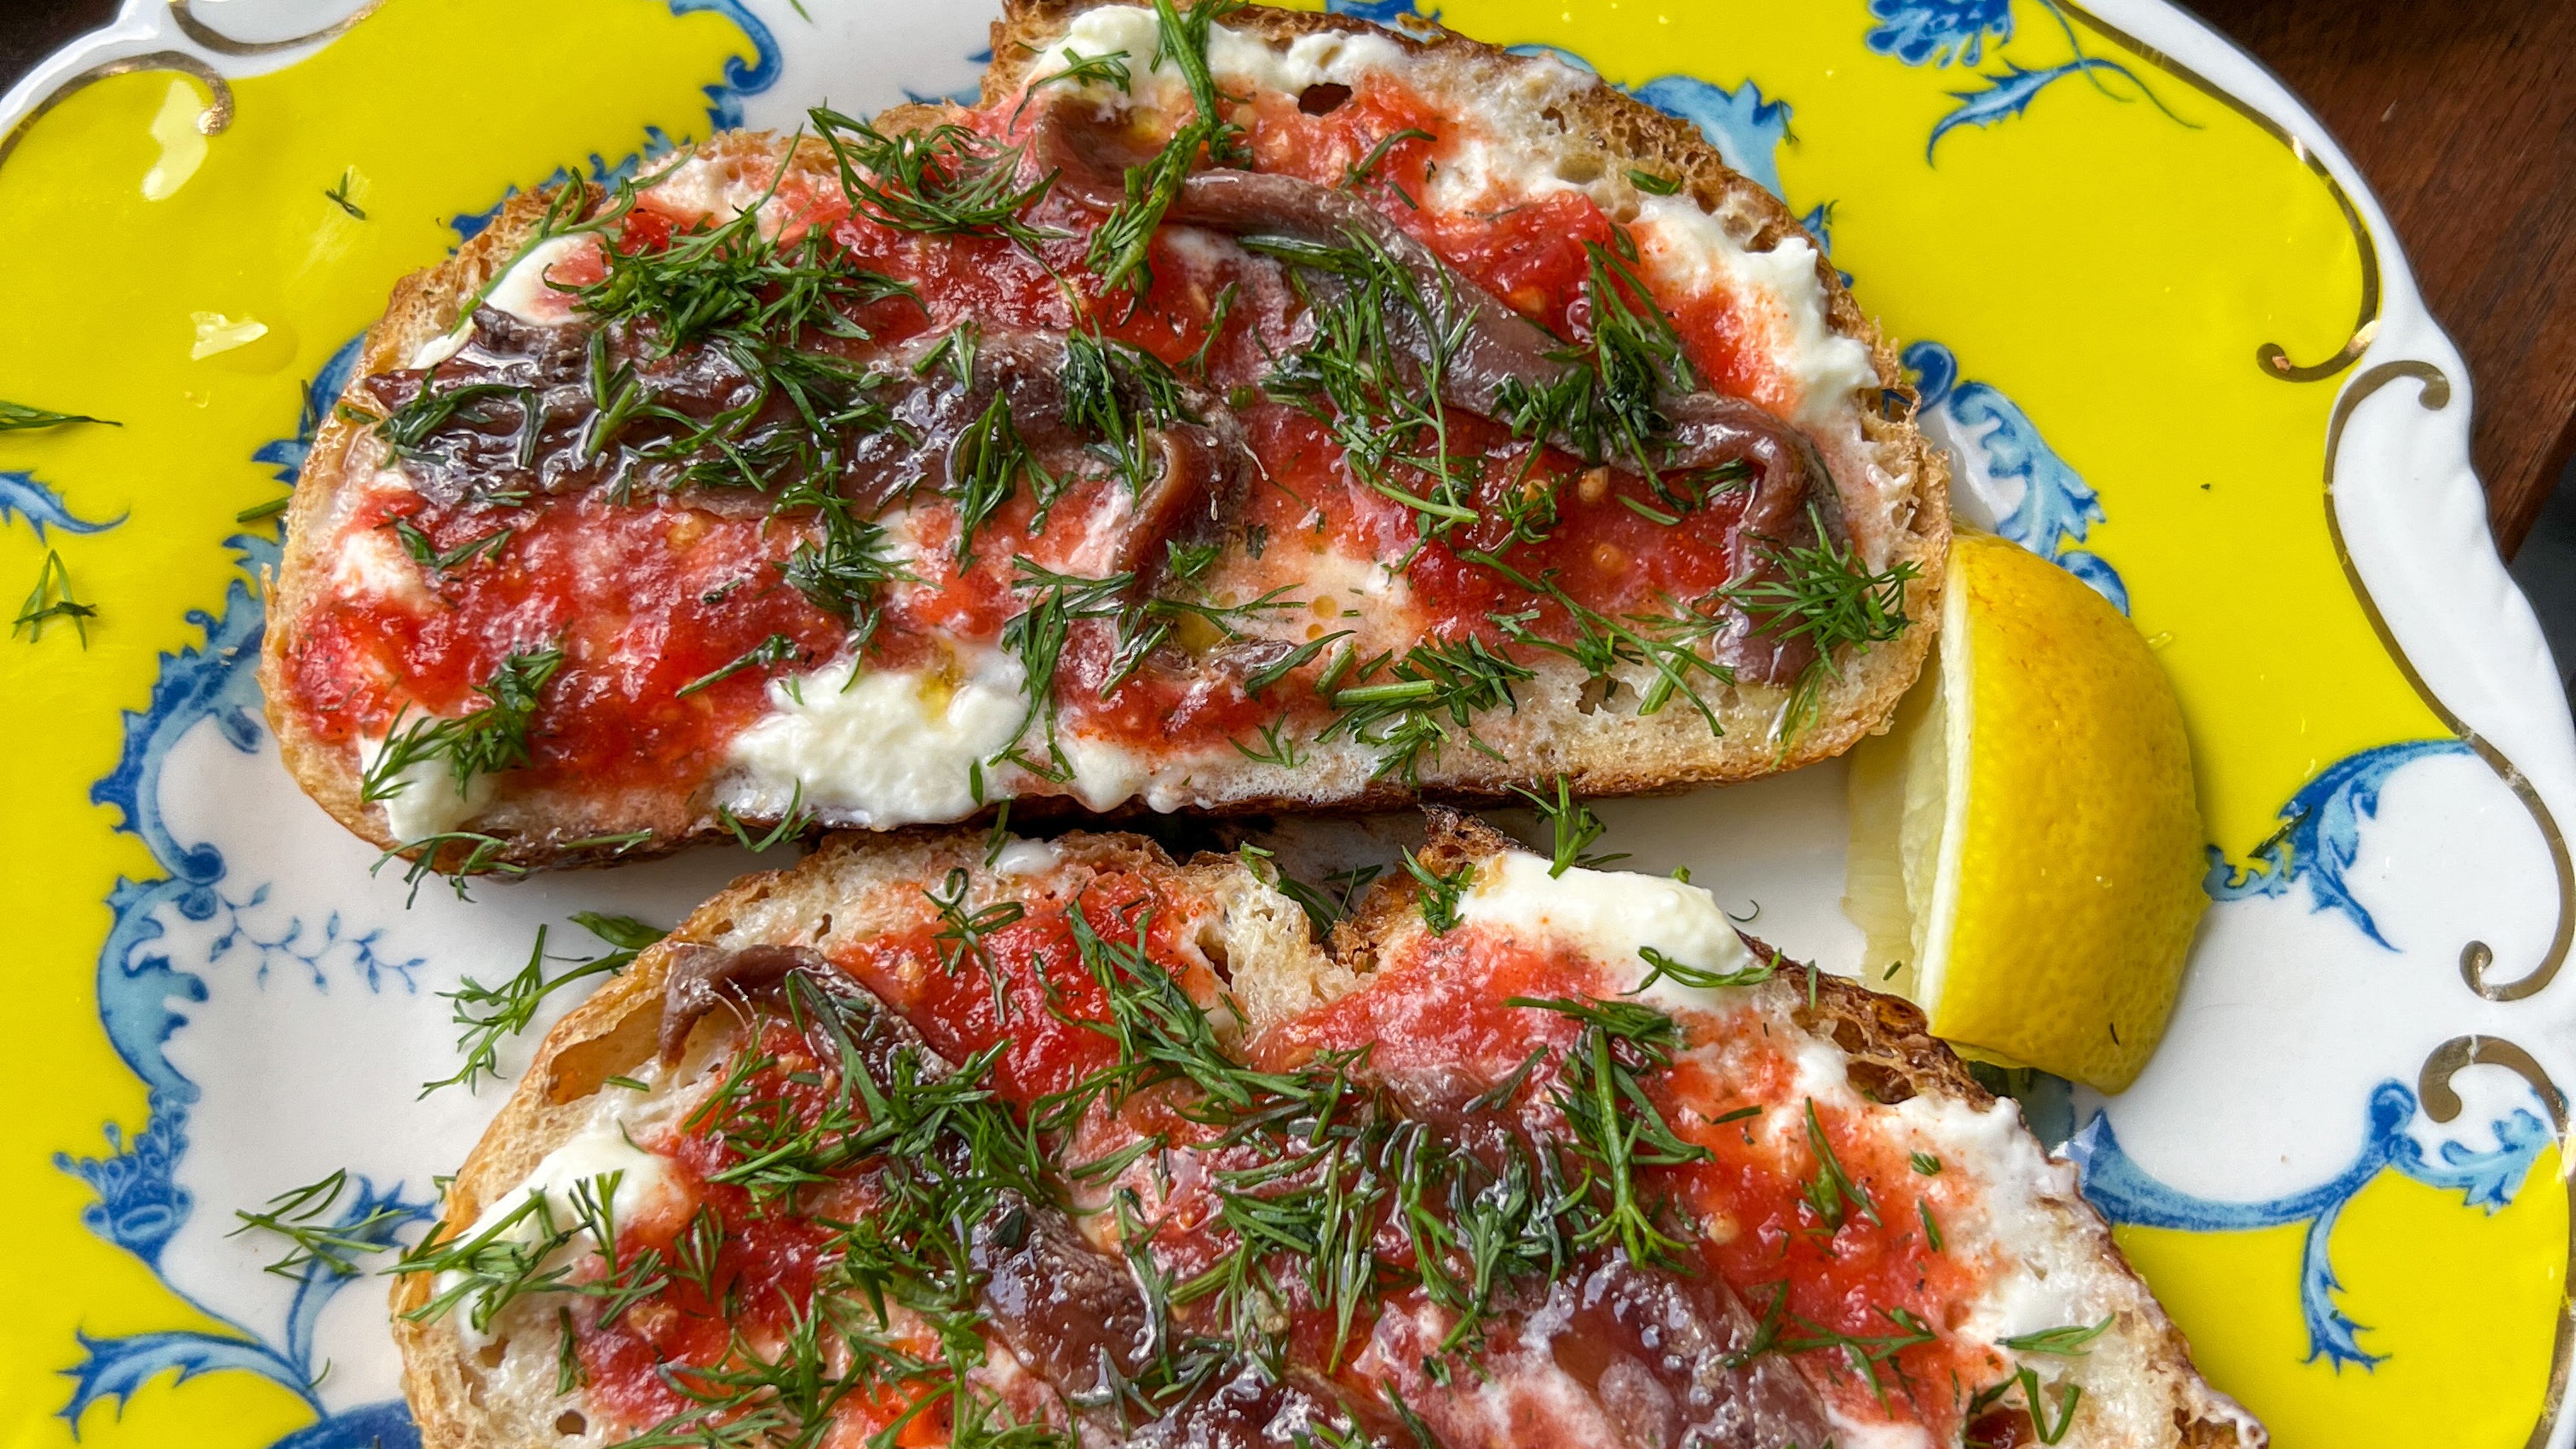 Bloody Mary Rimming Spice Grated Tomato Toast with Crème Fraîche, Anchovies, and Fresh Dill